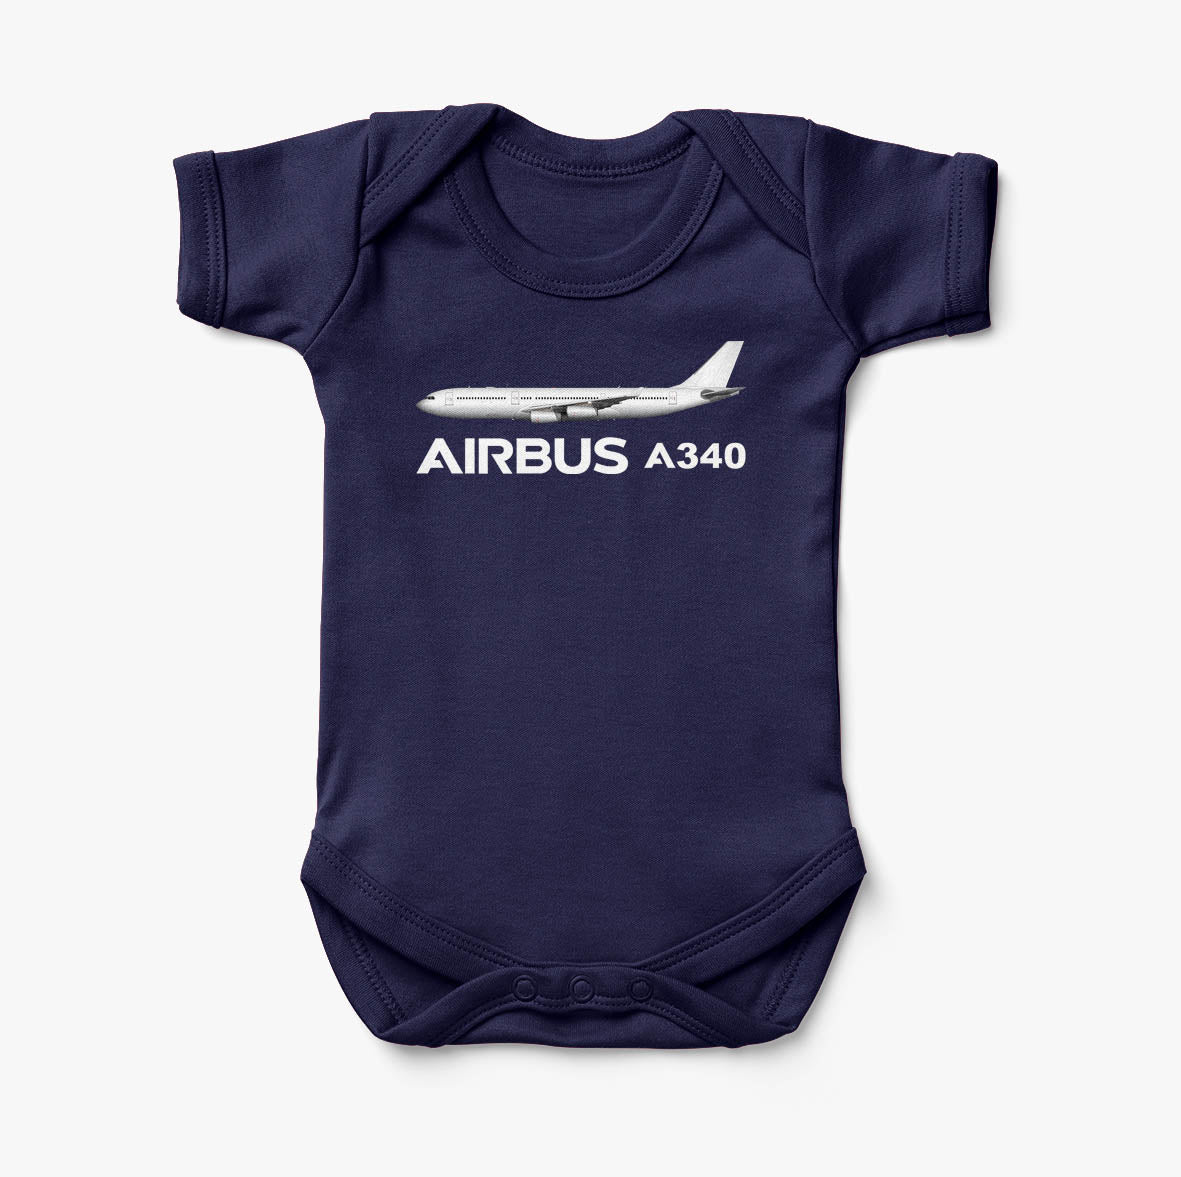 The Airbus A340 Designed Baby Bodysuits